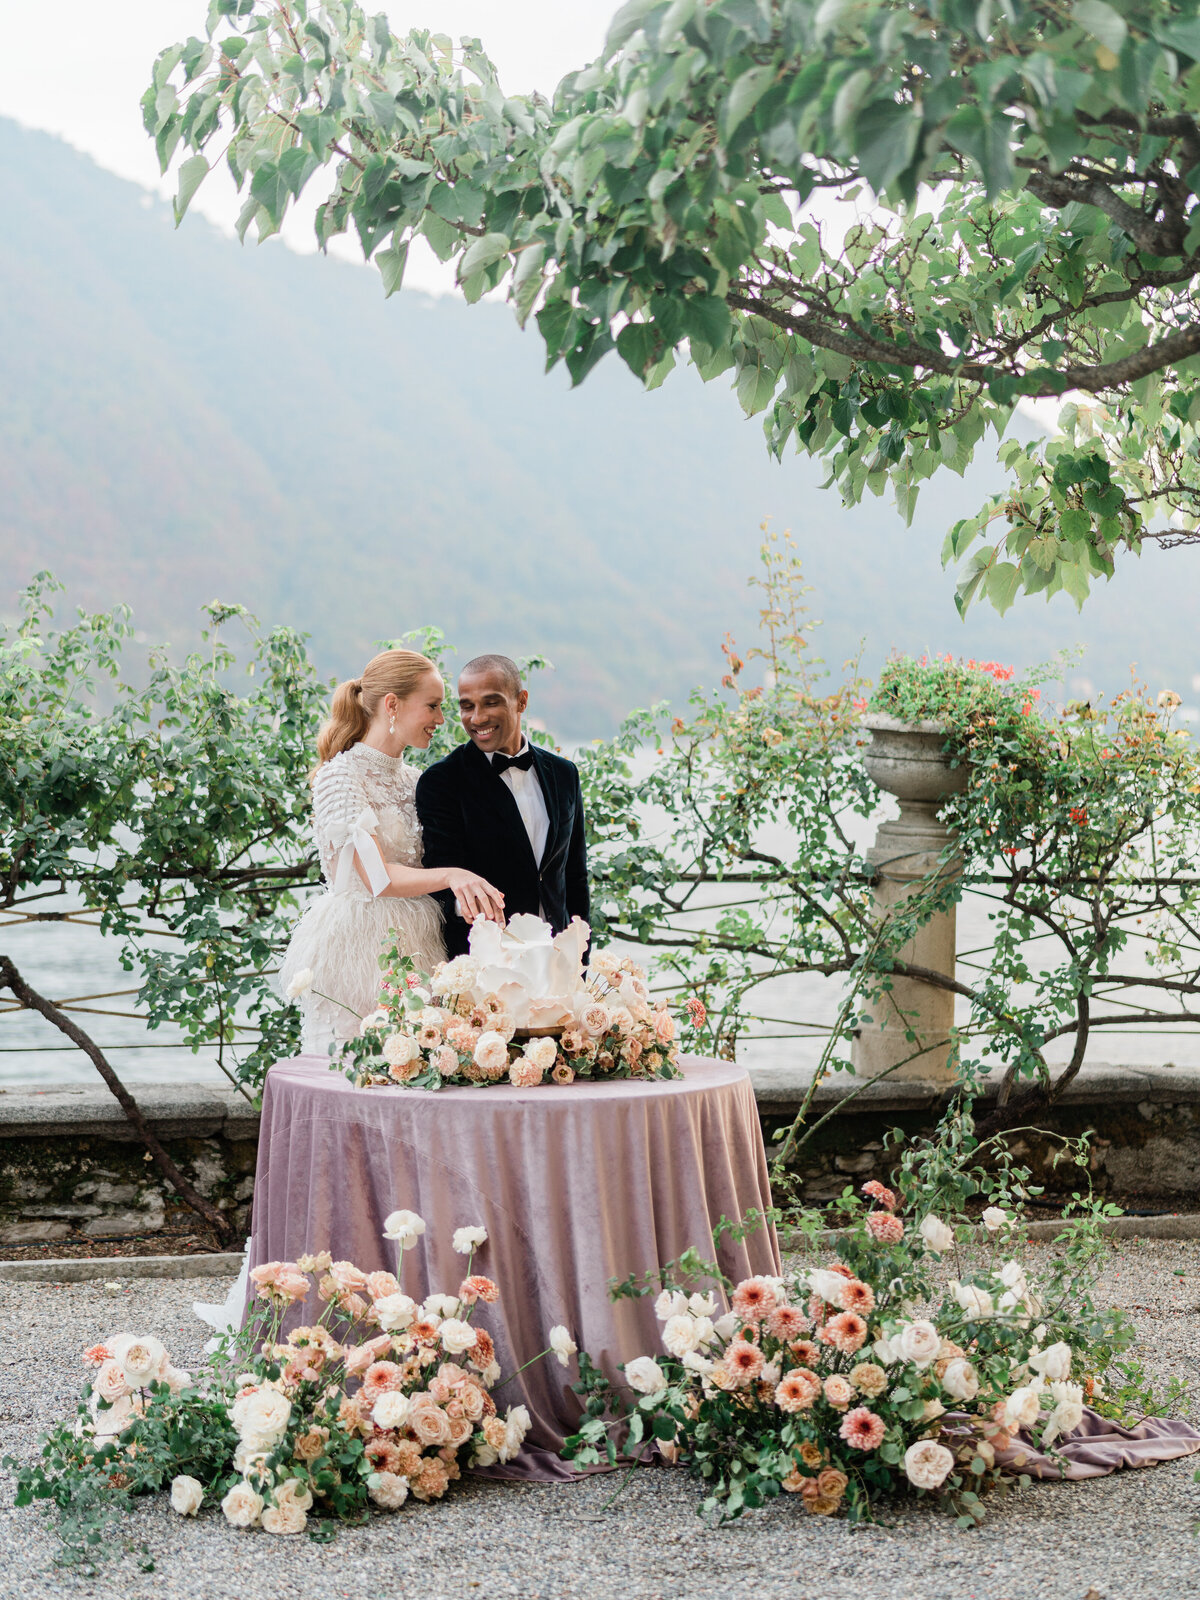 Liz Andolina Photography Destination Wedding Photographer in Italy, New York, Across the East Coast Editorial, heritage-quality images for stylish couples Villa Pizzo Editorial-Liz Andolina Photography-565